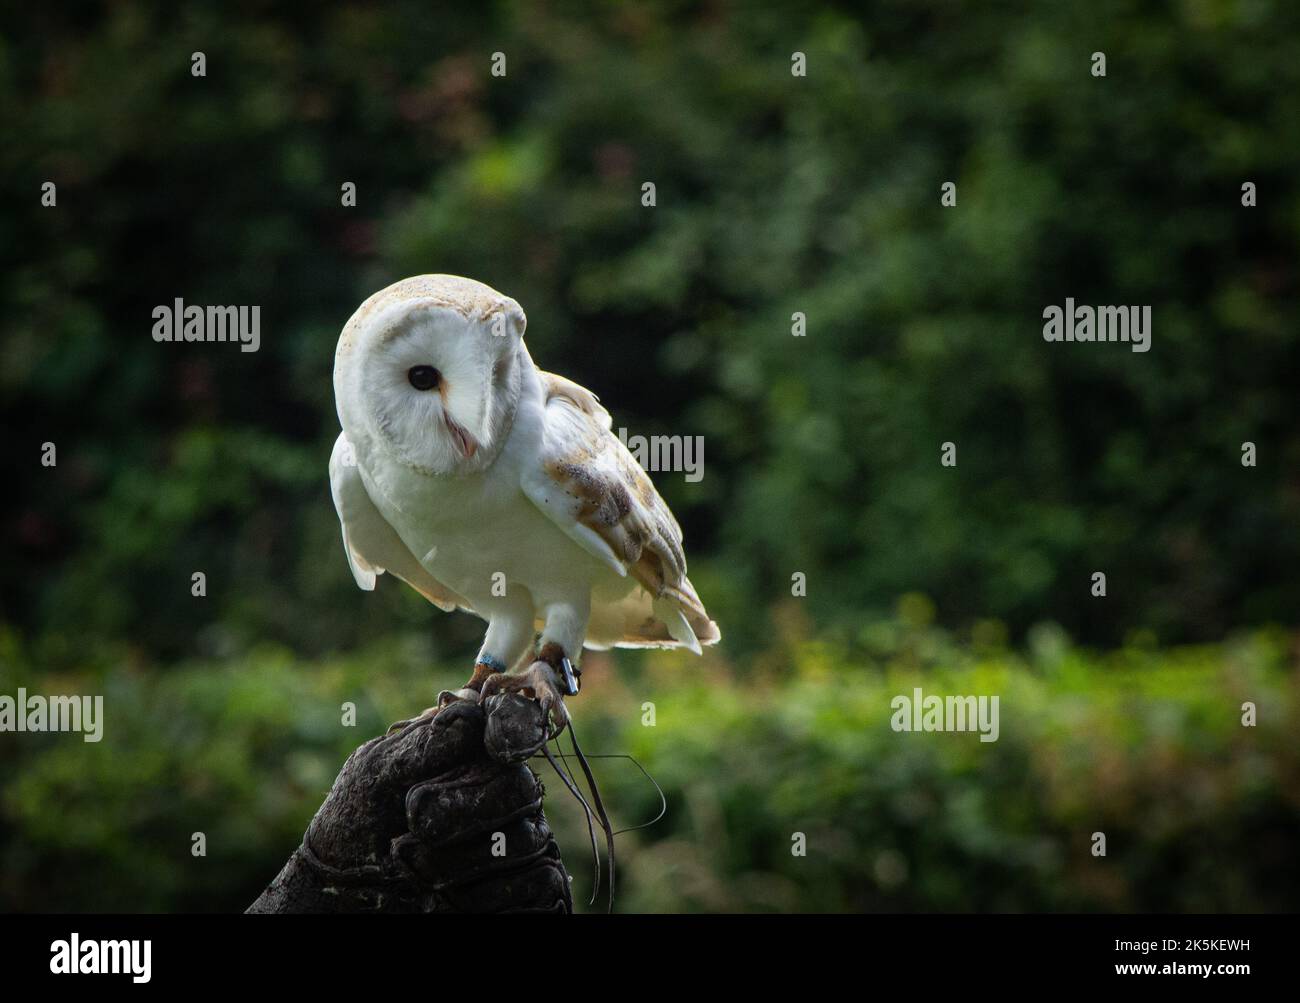 A closeup of a barn owl resting on a tree branch Stock Photo